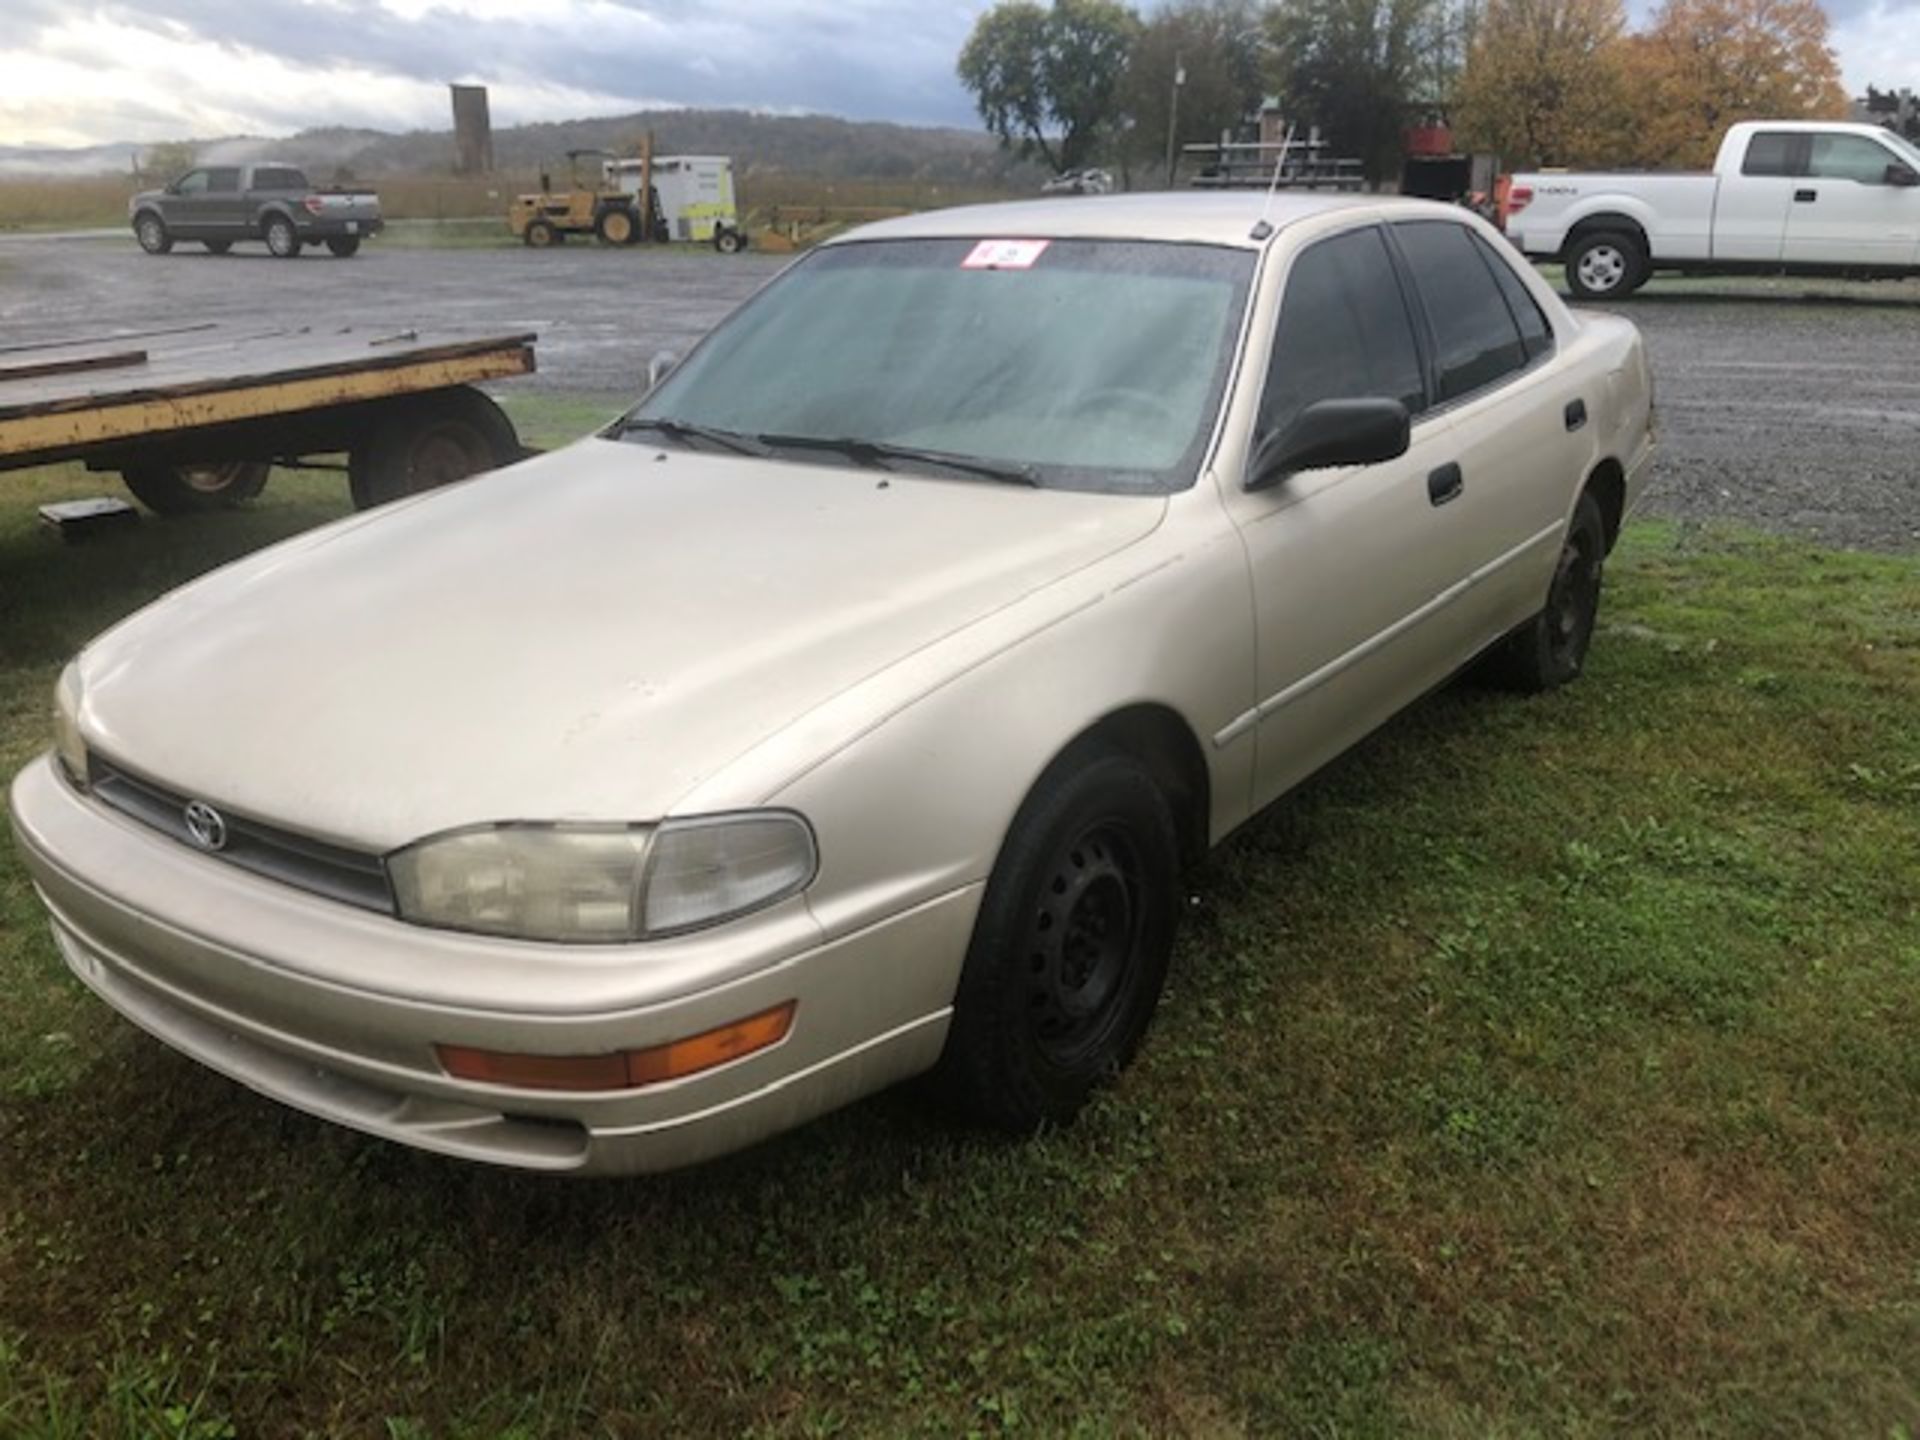 1993 Toyota Camry, 4 Cylinder, 5 Speed, ODO 248,636 Miles, Vin 4T1SK11EXPU179133 - Image 2 of 2